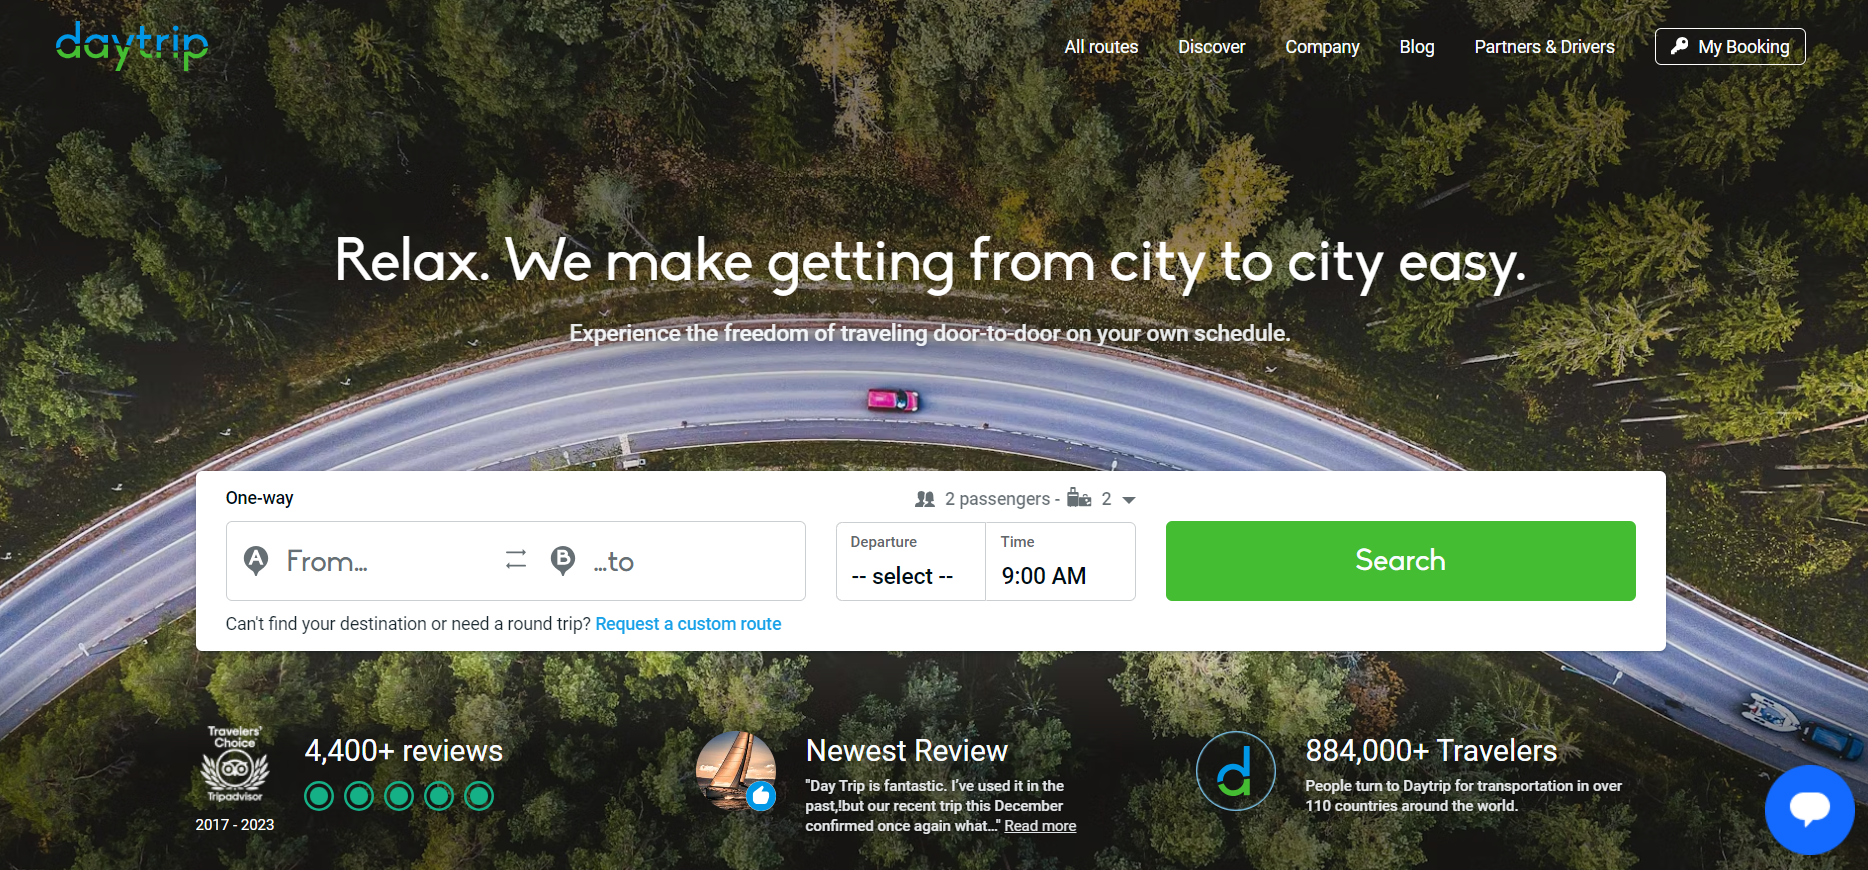 Daytrip Secures €9.2 Million Funding and Elevates Brand with Upgrade to Daytrip.com